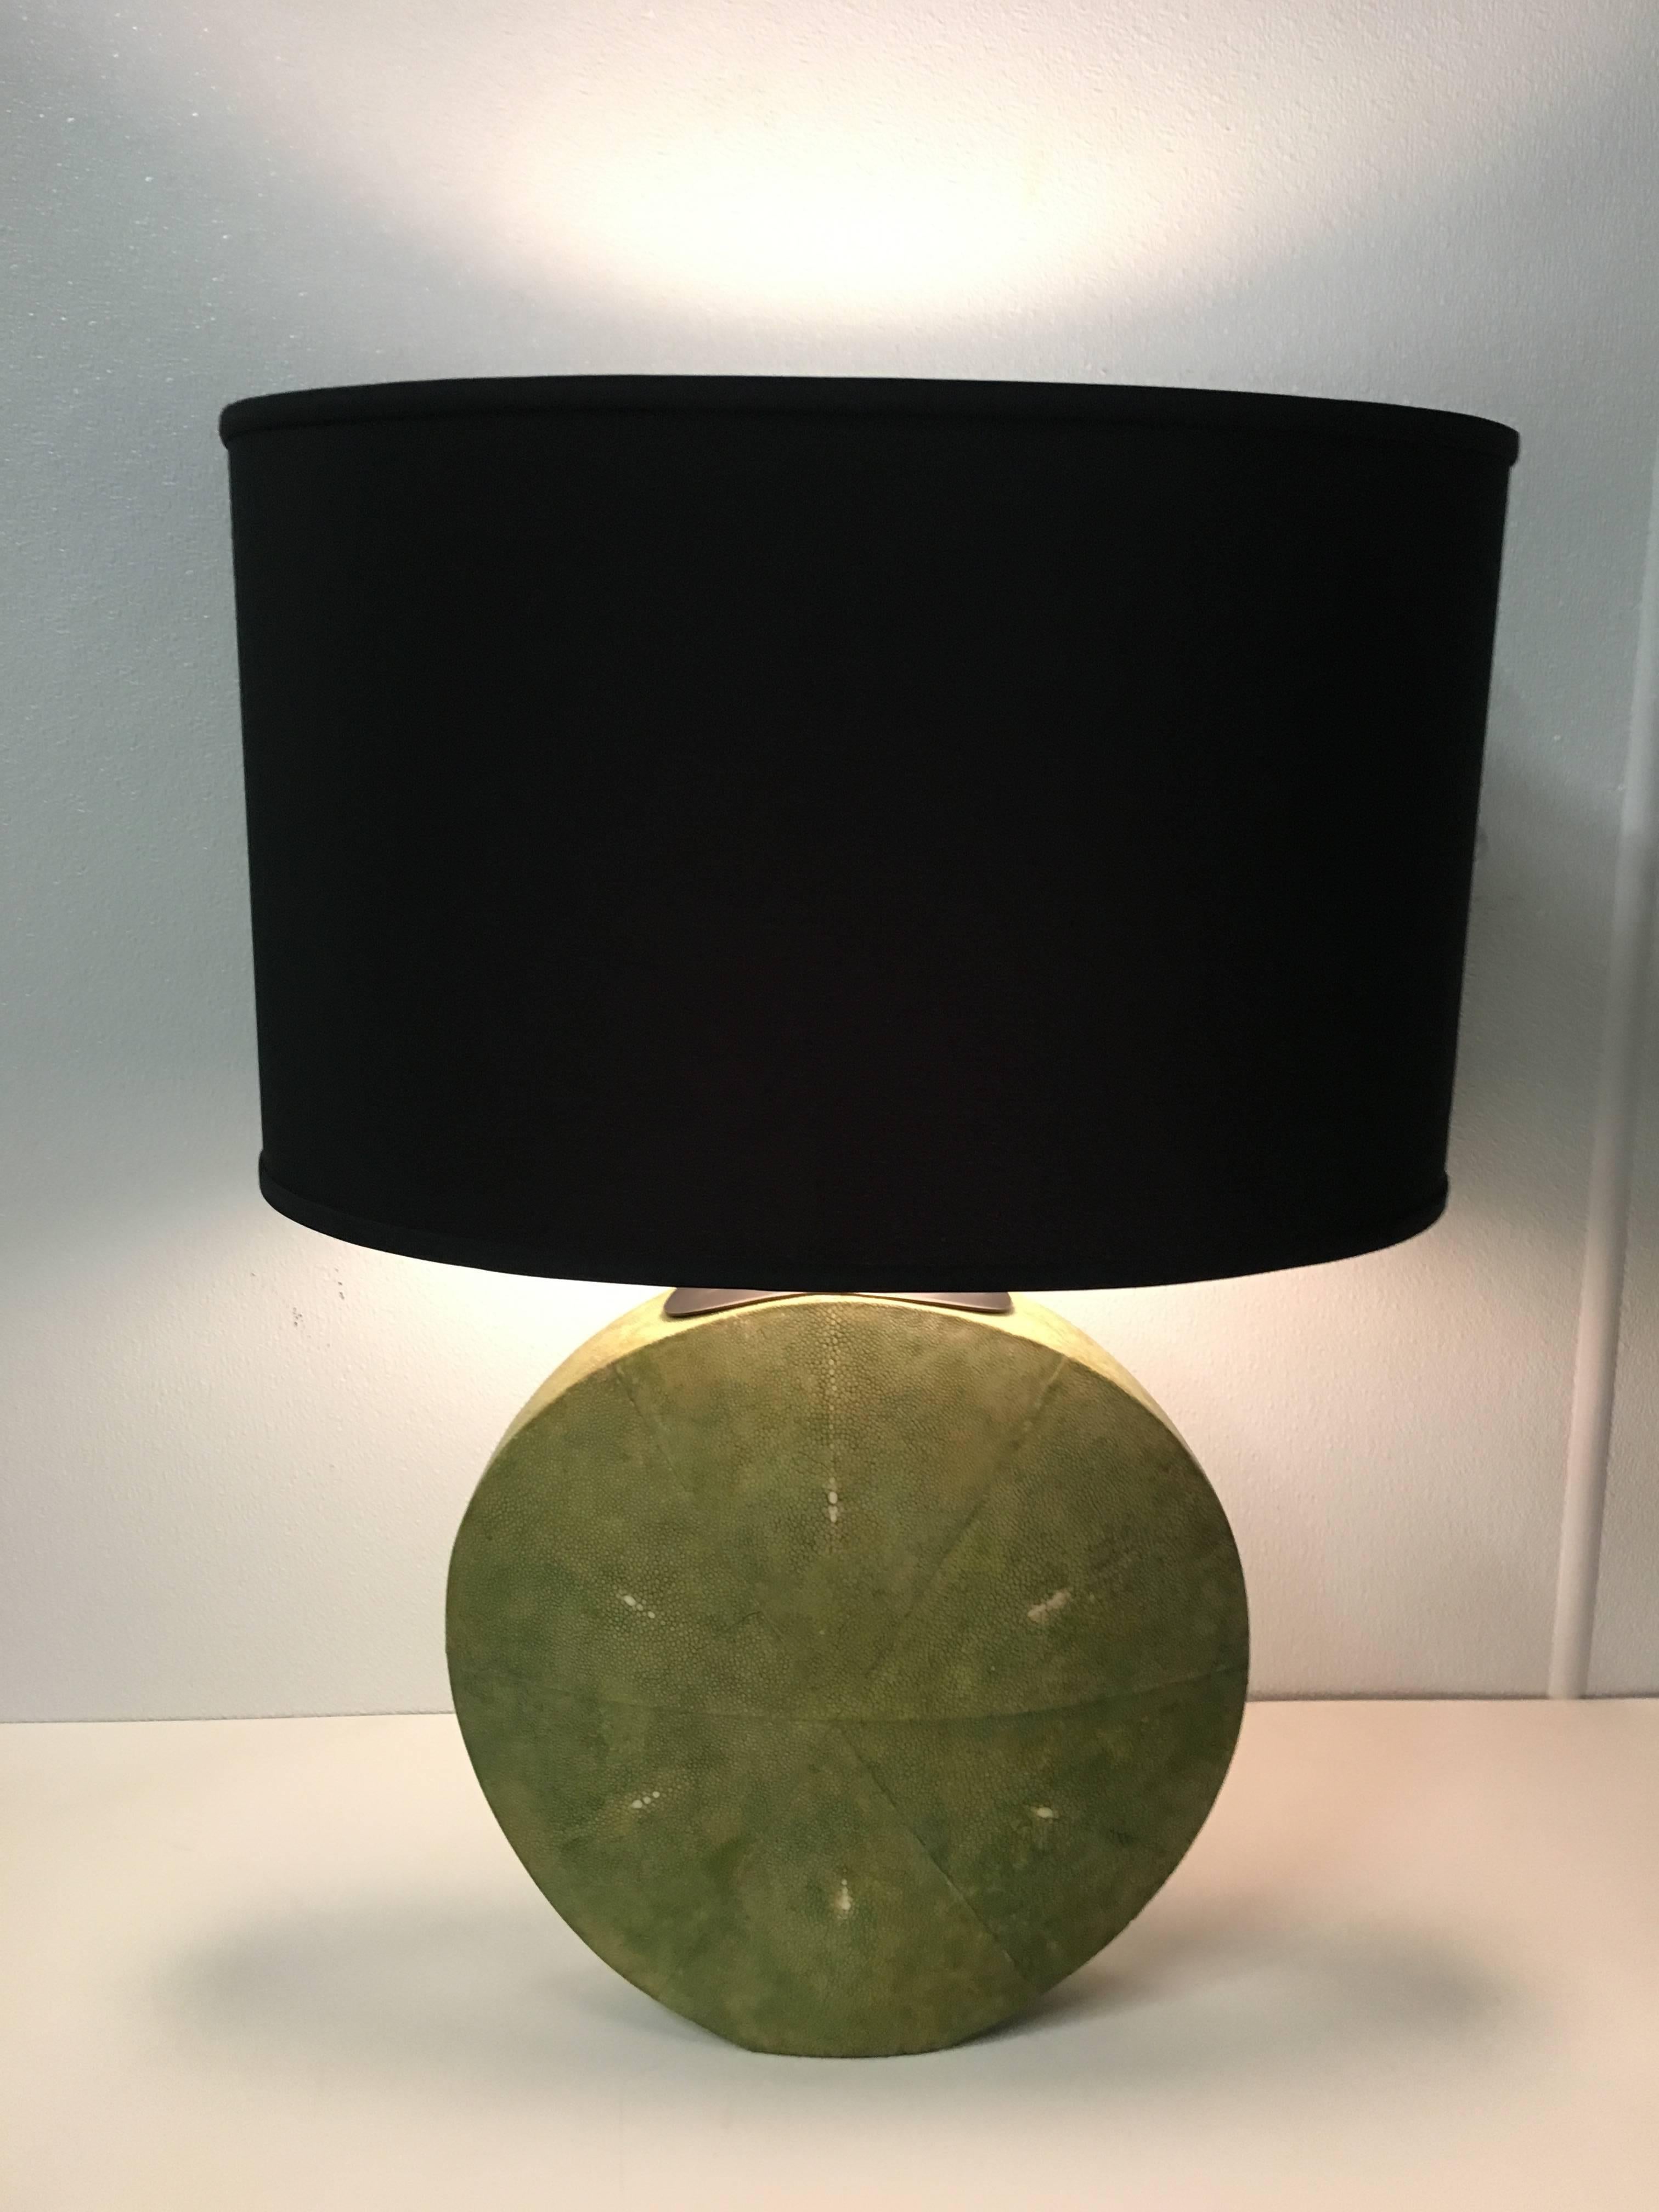 Art Deco moon flask Shagreen table lamp, with finely bookmatched sharkskin.
Shade and harp for display only.